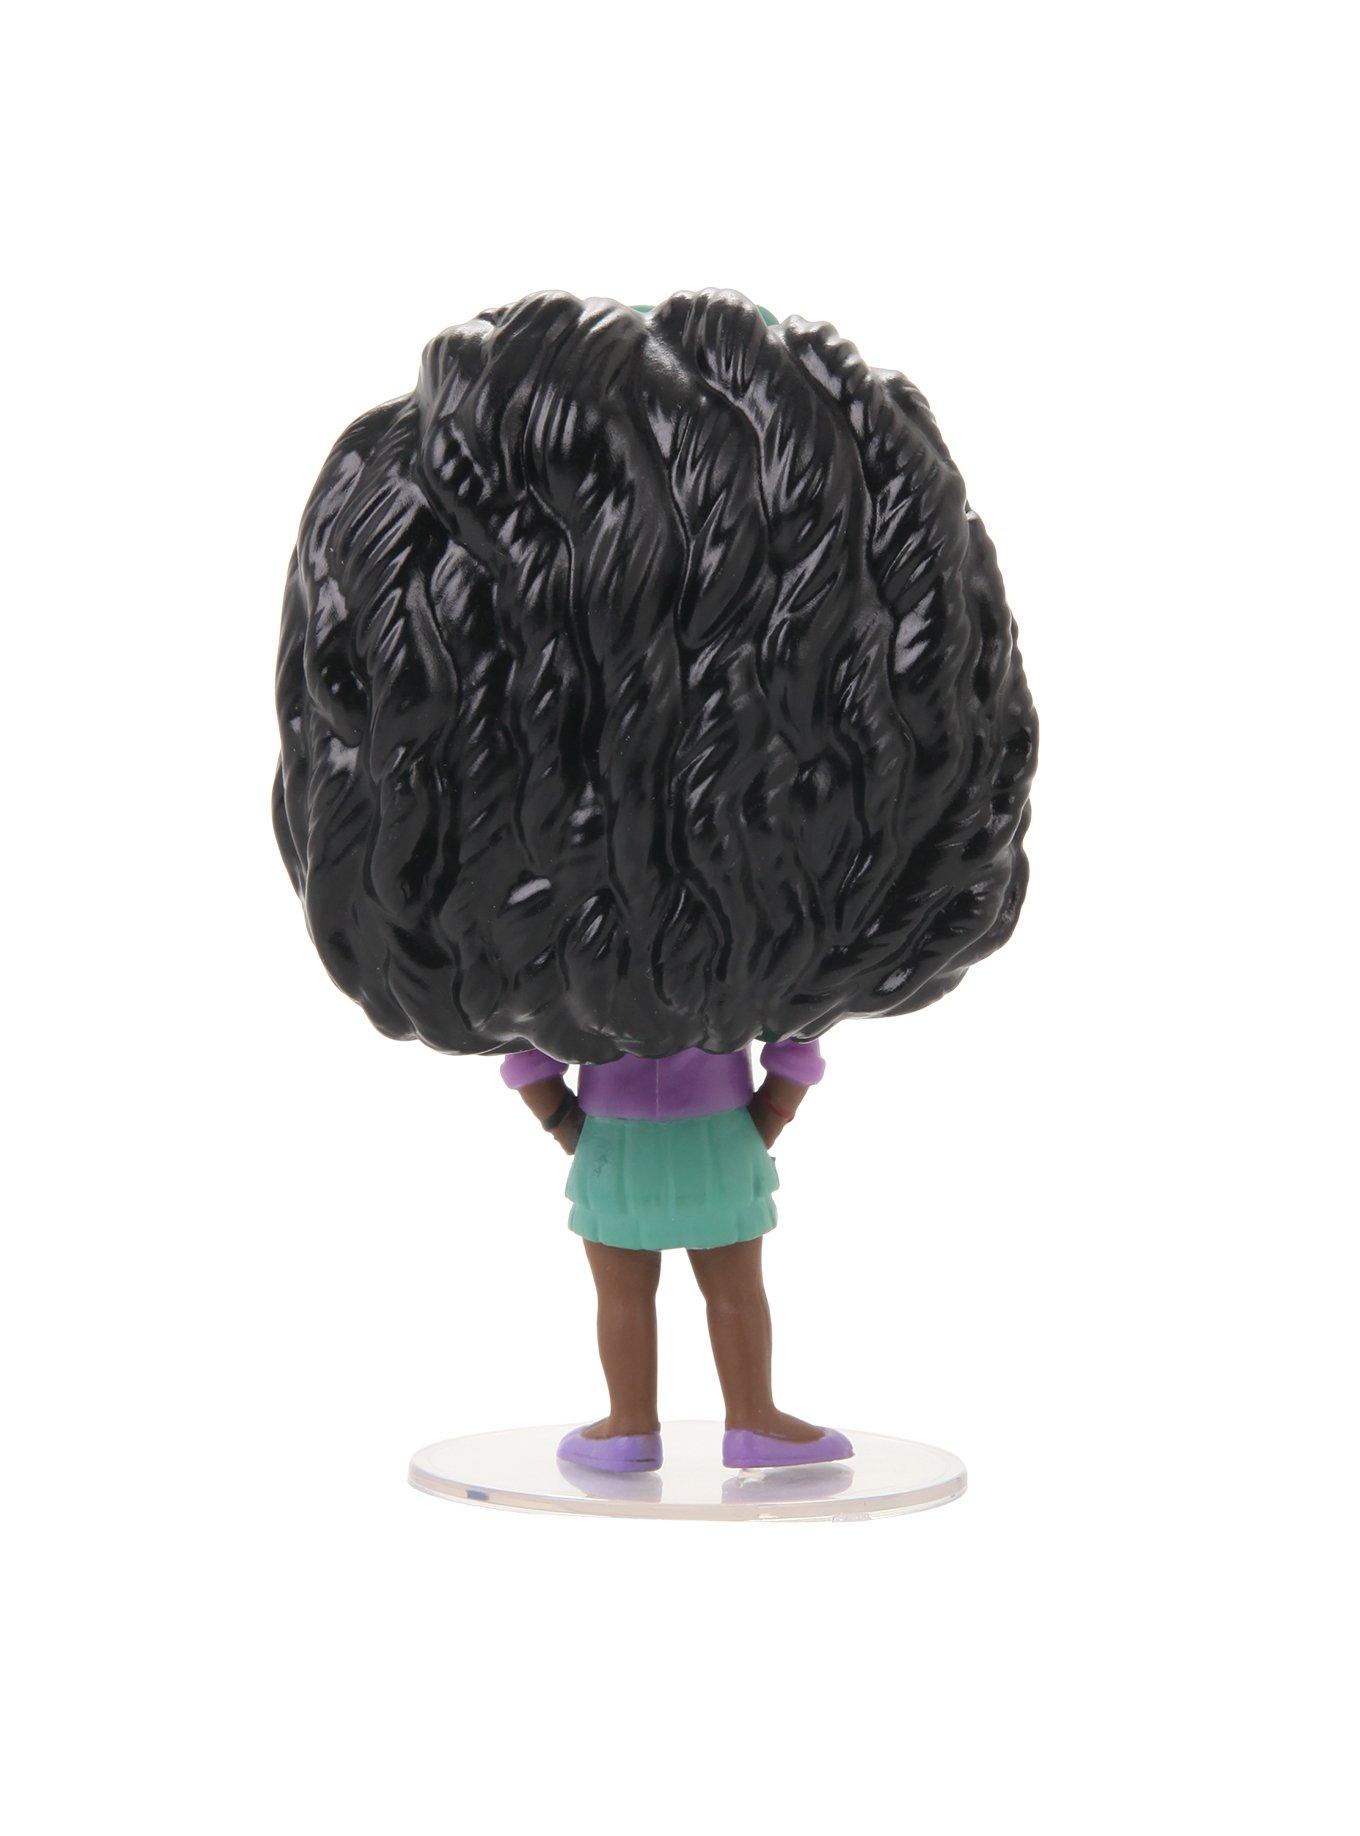 Funko Saved By The Bell Pop! Television Lisa Turtle Vinyl Figure, , alternate